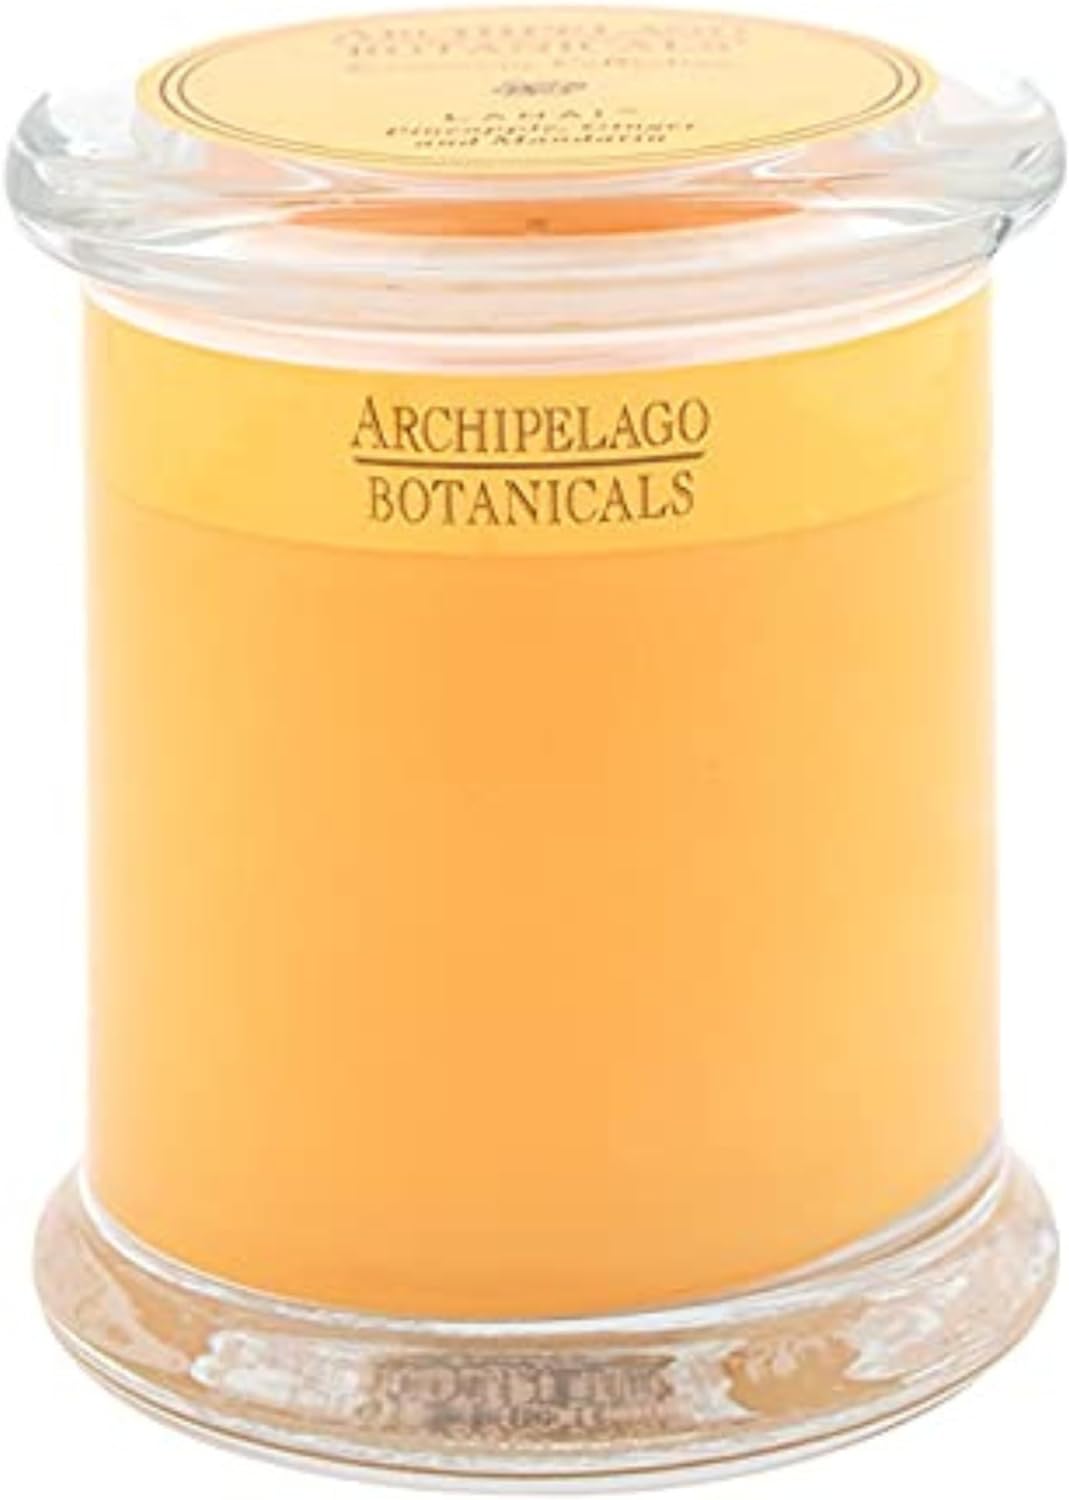 Archipelago Botanicals Lanai Glass Jar Candle, Pineapple, Mandarin and Ginger Scent, Lead-Free Candle Wicks, Burns Approx. 60 Hours (8.6 oz)